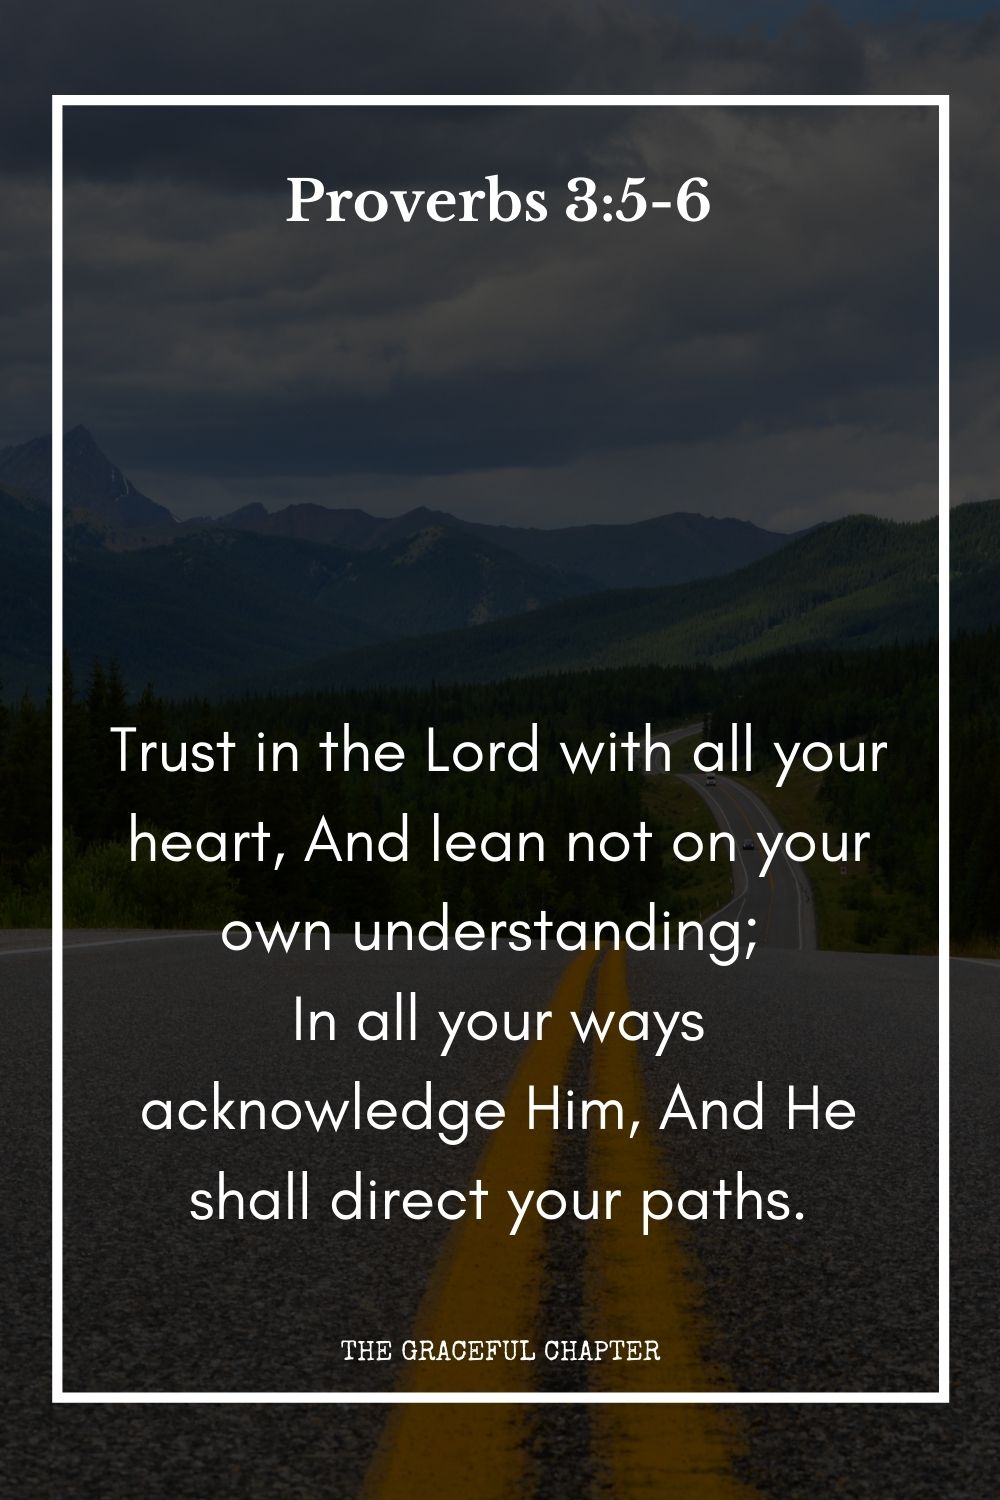 Trust in the Lord with all your heart, And lean not on your own understanding; In all your ways acknowledge Him, And He shall direct your paths. Proverbs 3:5-6